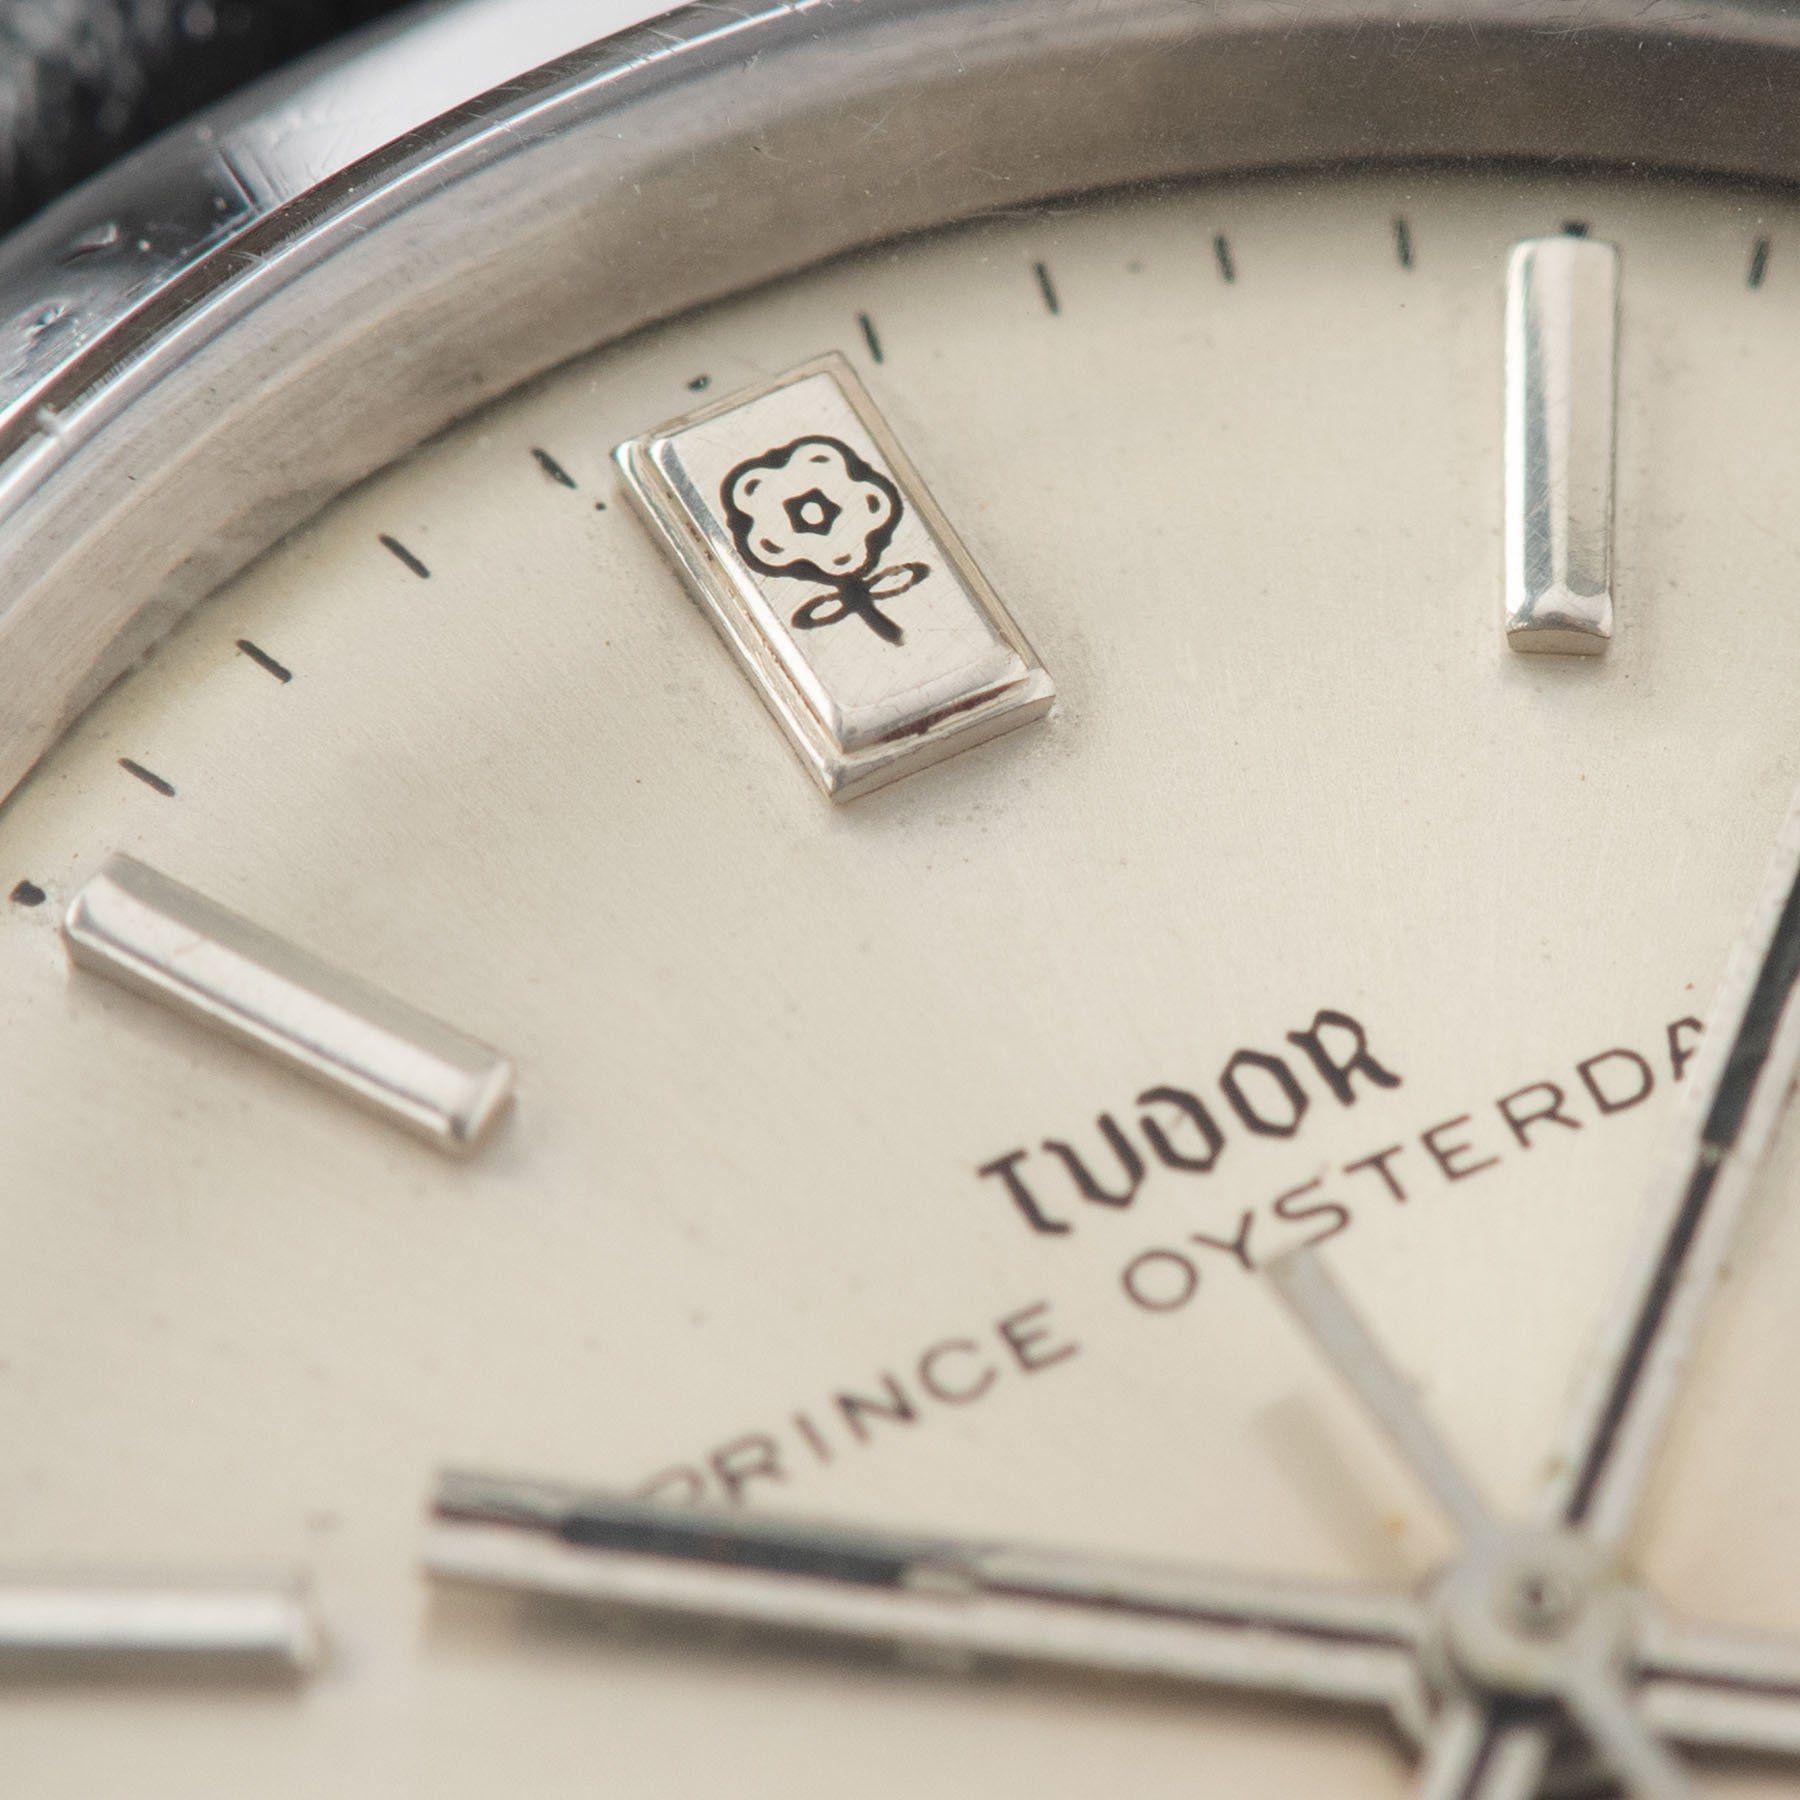 Tudor Prince Oysterdate Silver Dial Reference 7996 with an applied rectangular marker at 12 o’clock